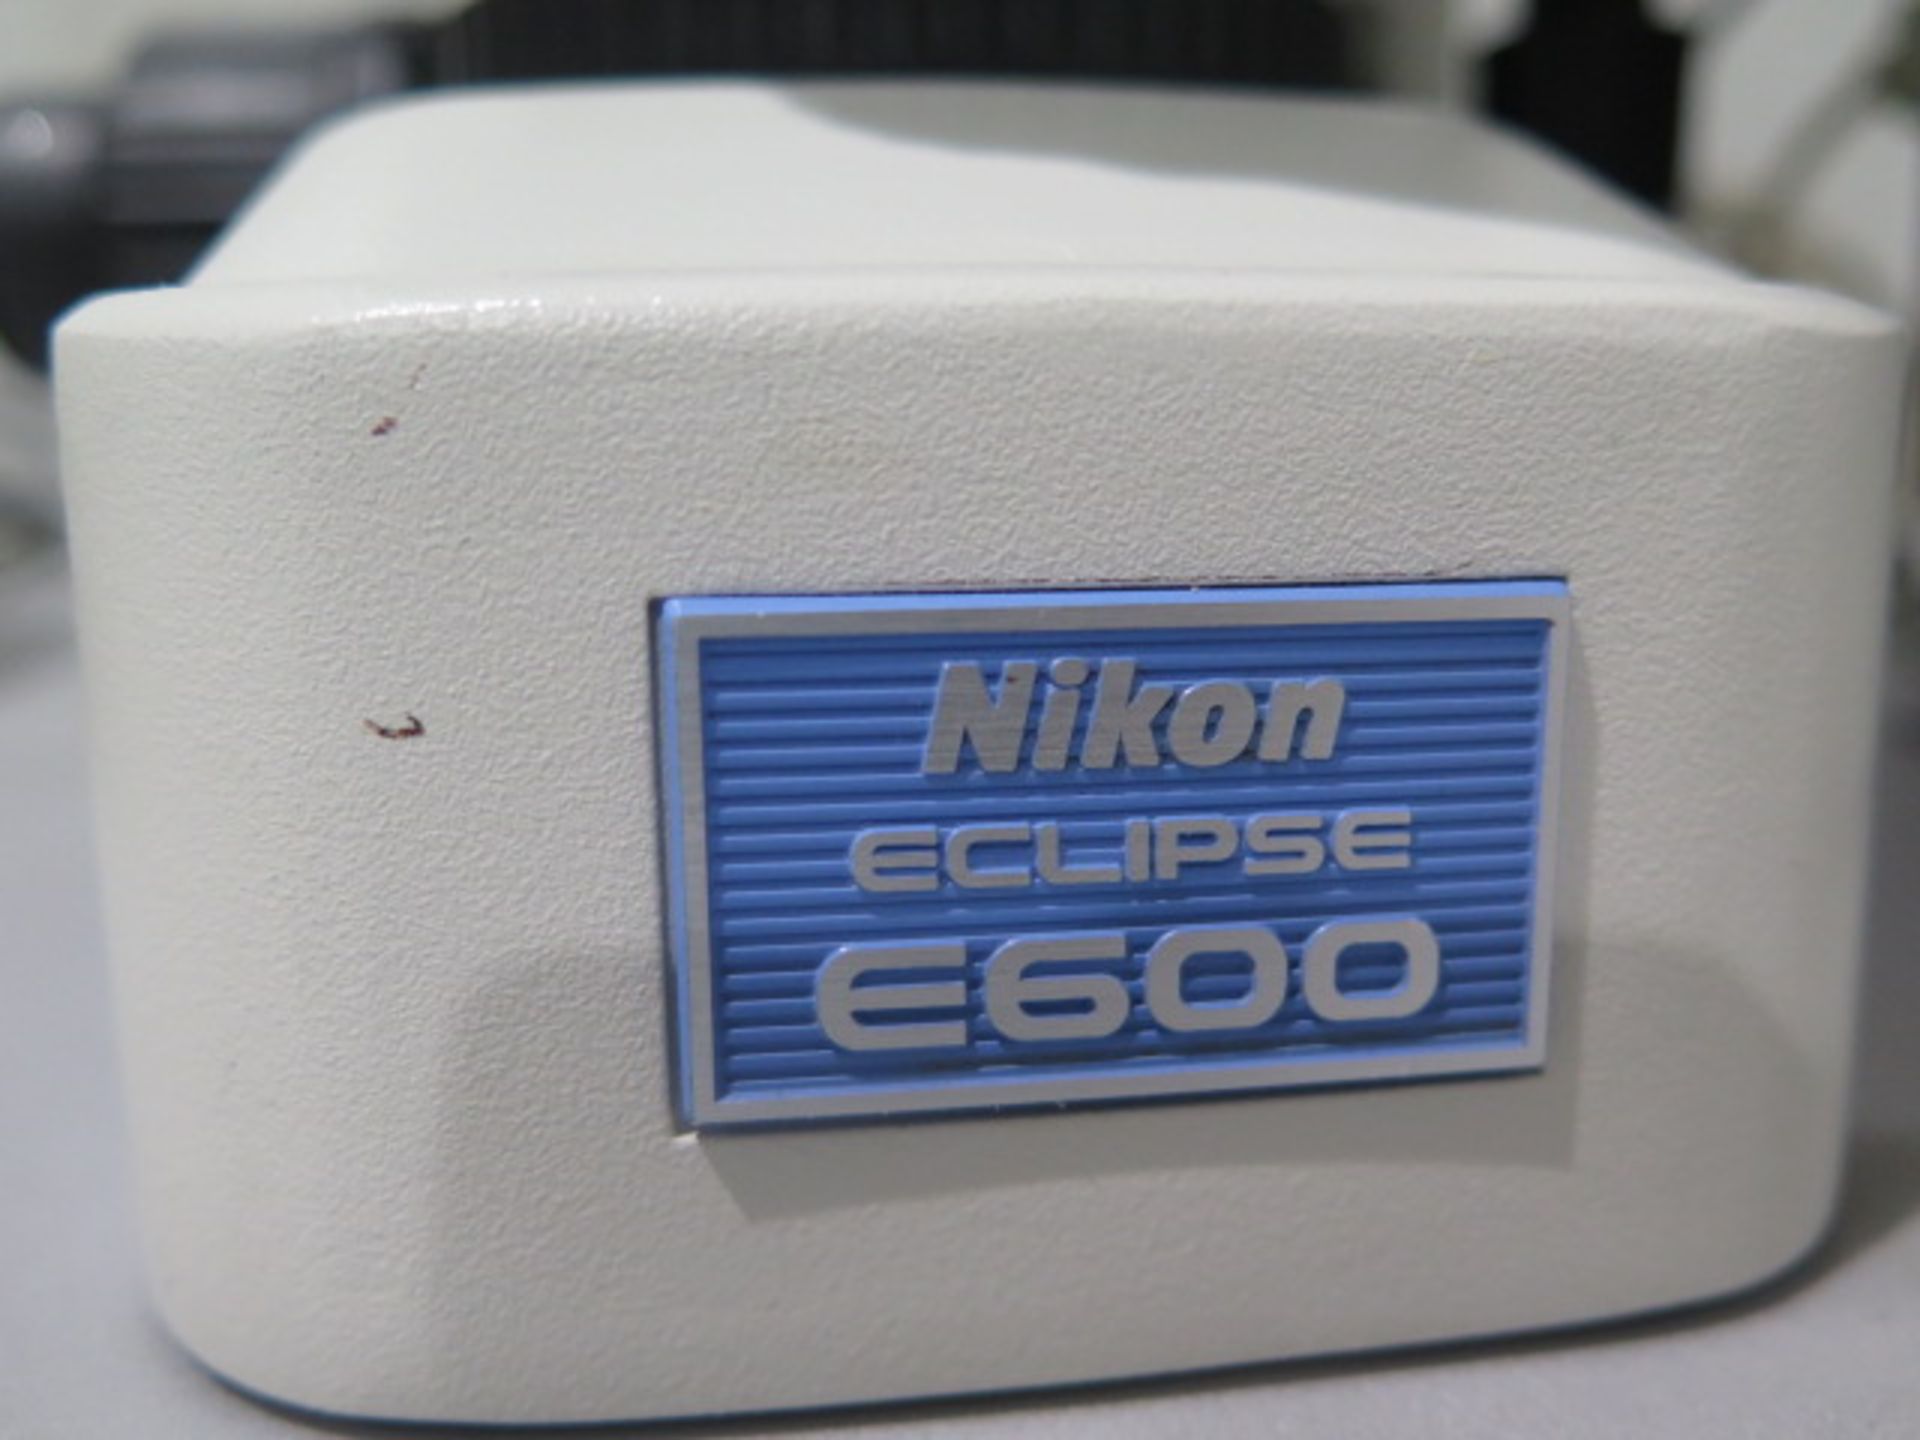 Nikon Eclipse E600 Research Microscope s/n 763673 w/ Nikon Light,DS-U2 Digital Sight Unit,SOLD AS IS - Image 14 of 15